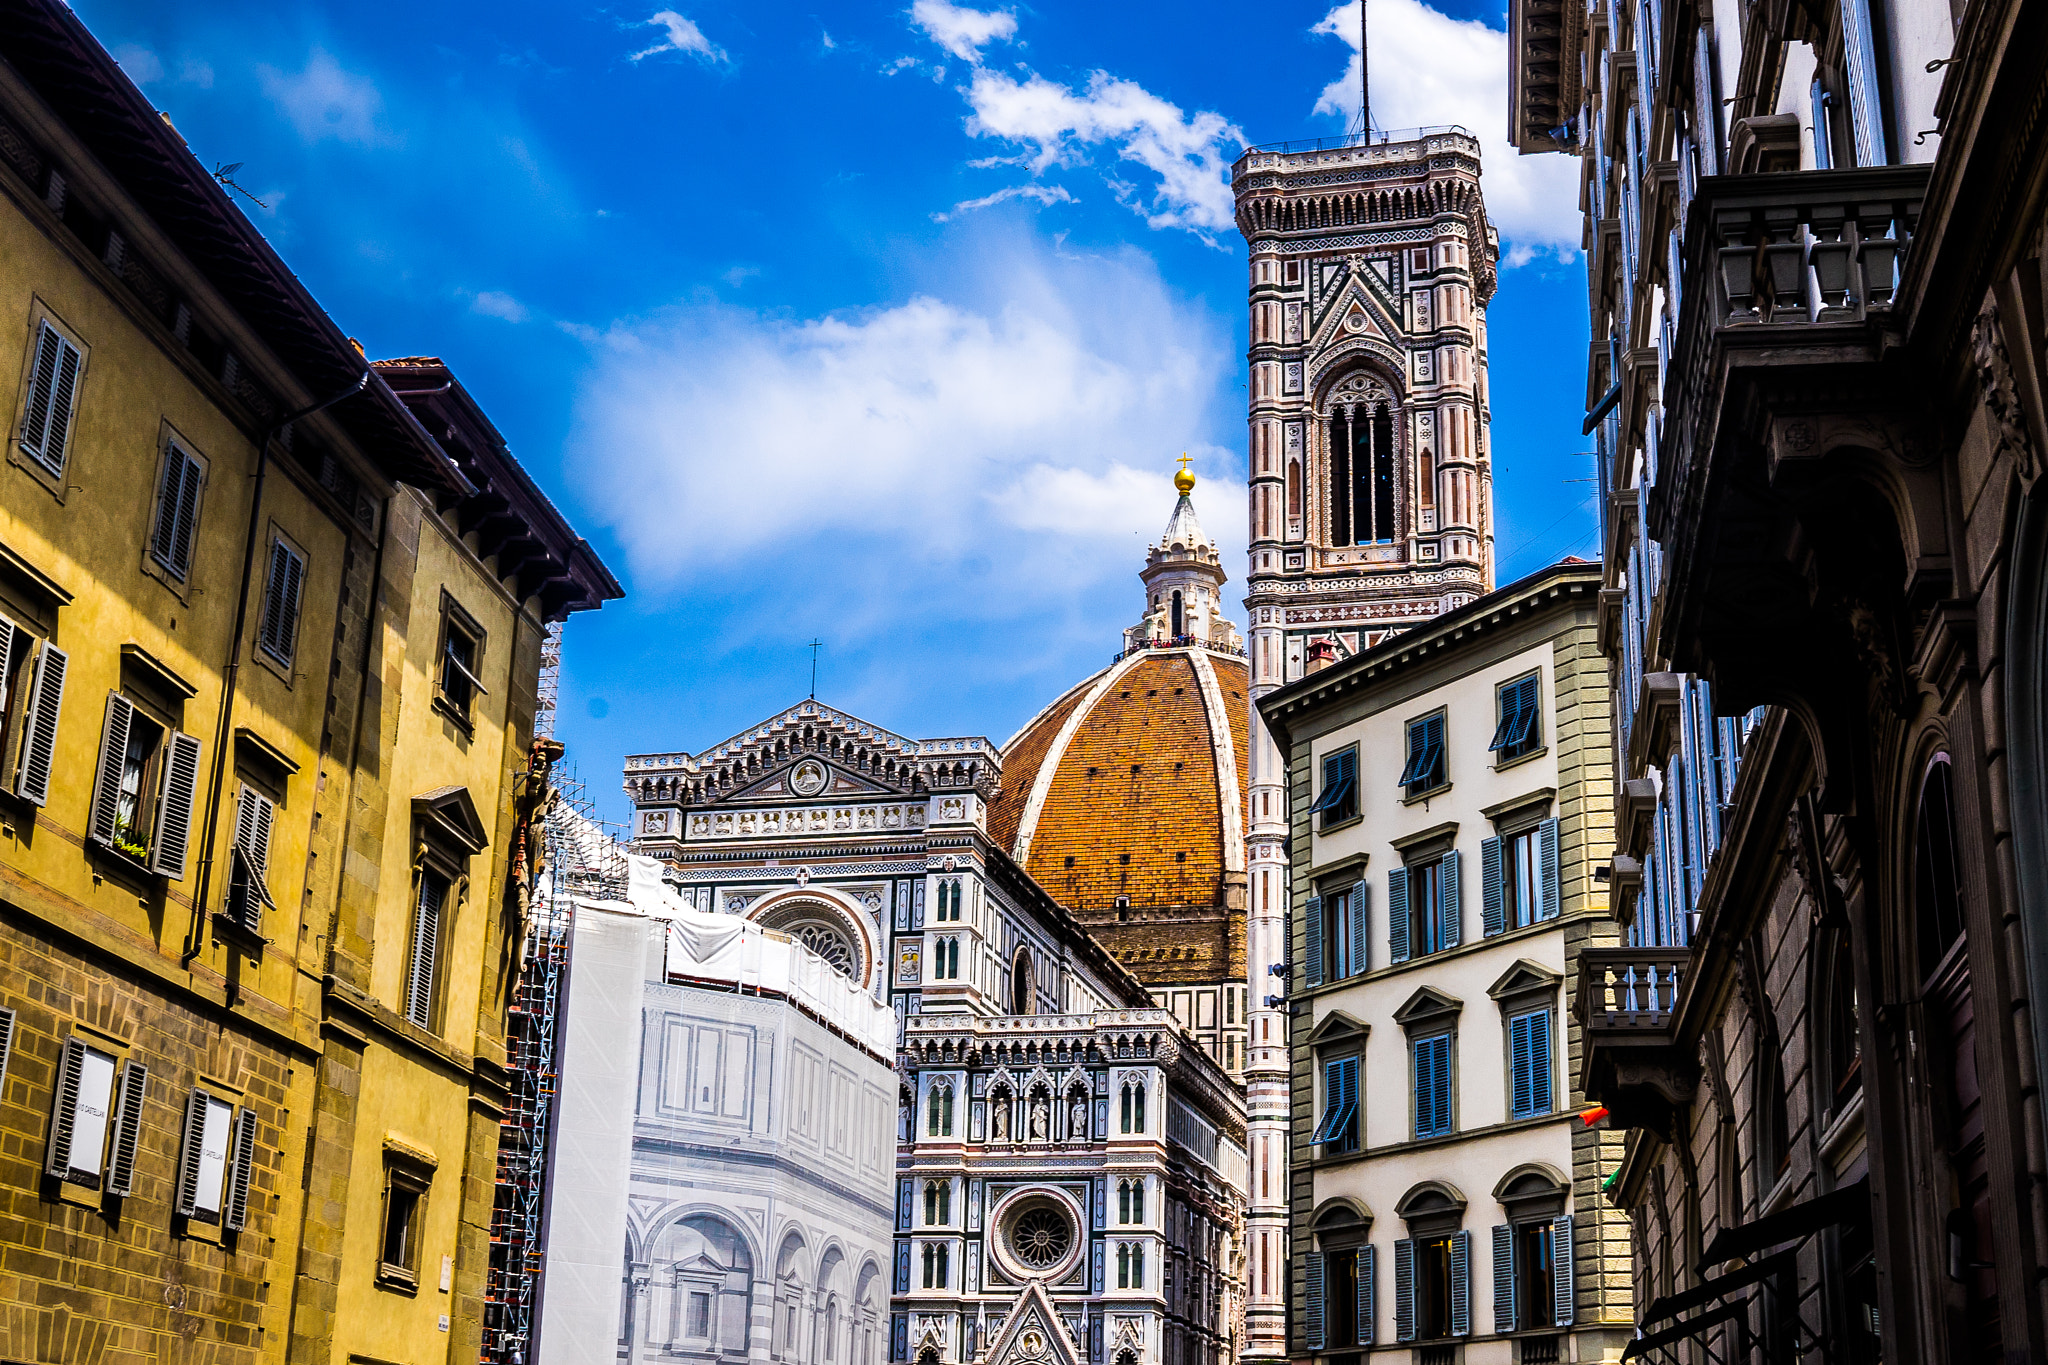 Sony a7 sample photo. Duomo florence photography